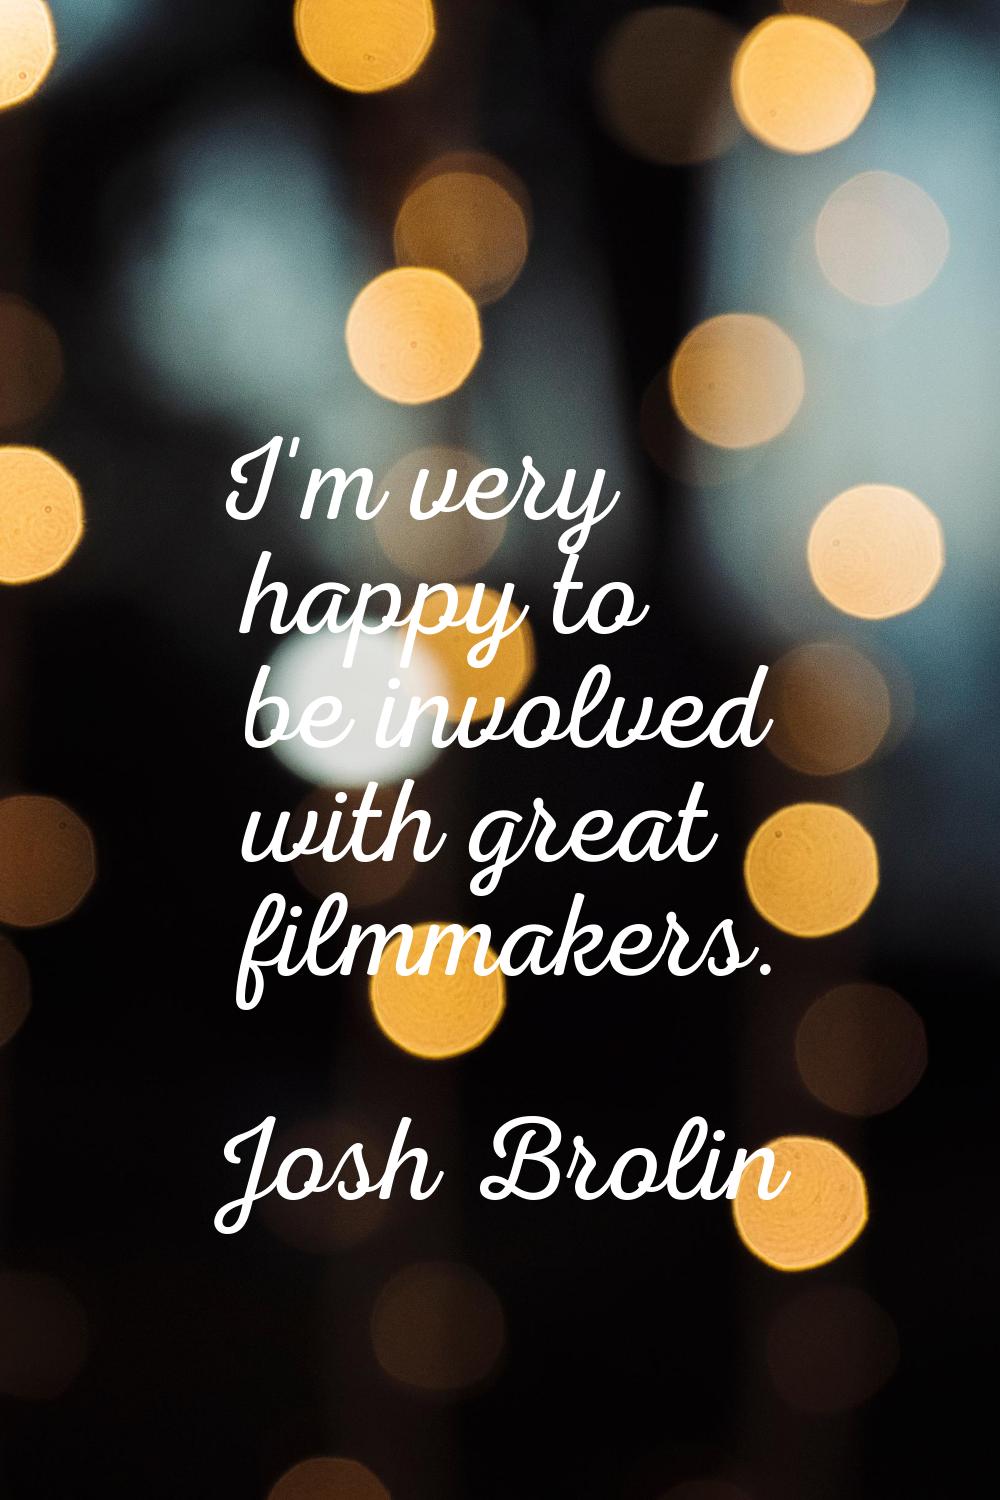 I'm very happy to be involved with great filmmakers.